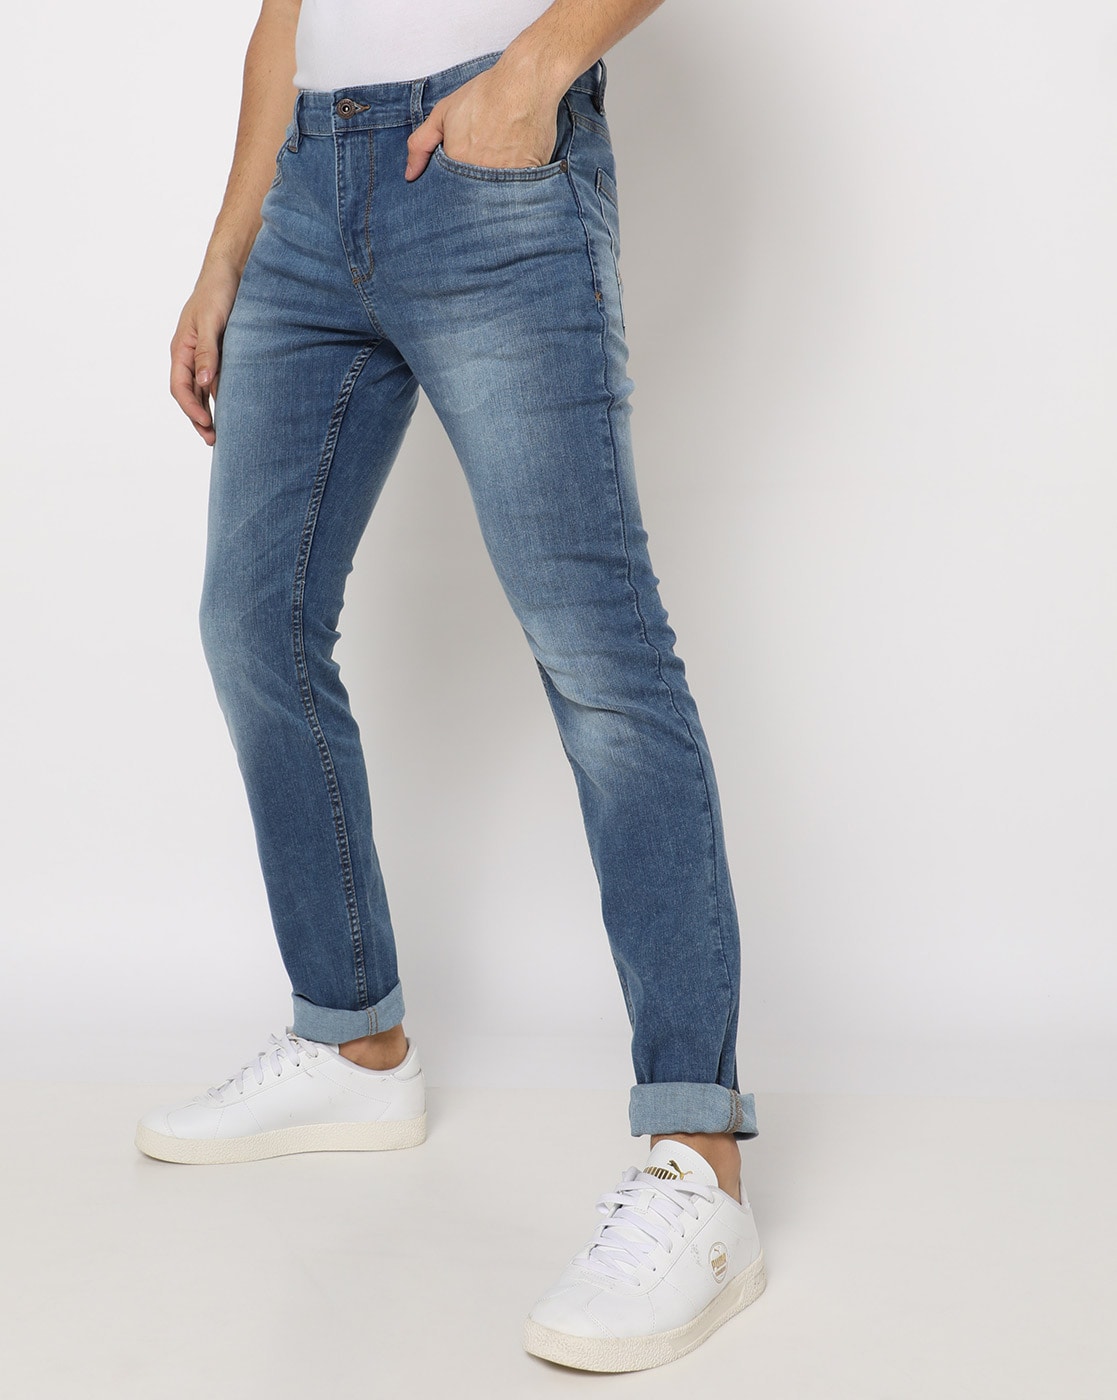 Mast  Harbour Slim Trousers outlet  Women  1800 products on sale   FASHIOLAcouk